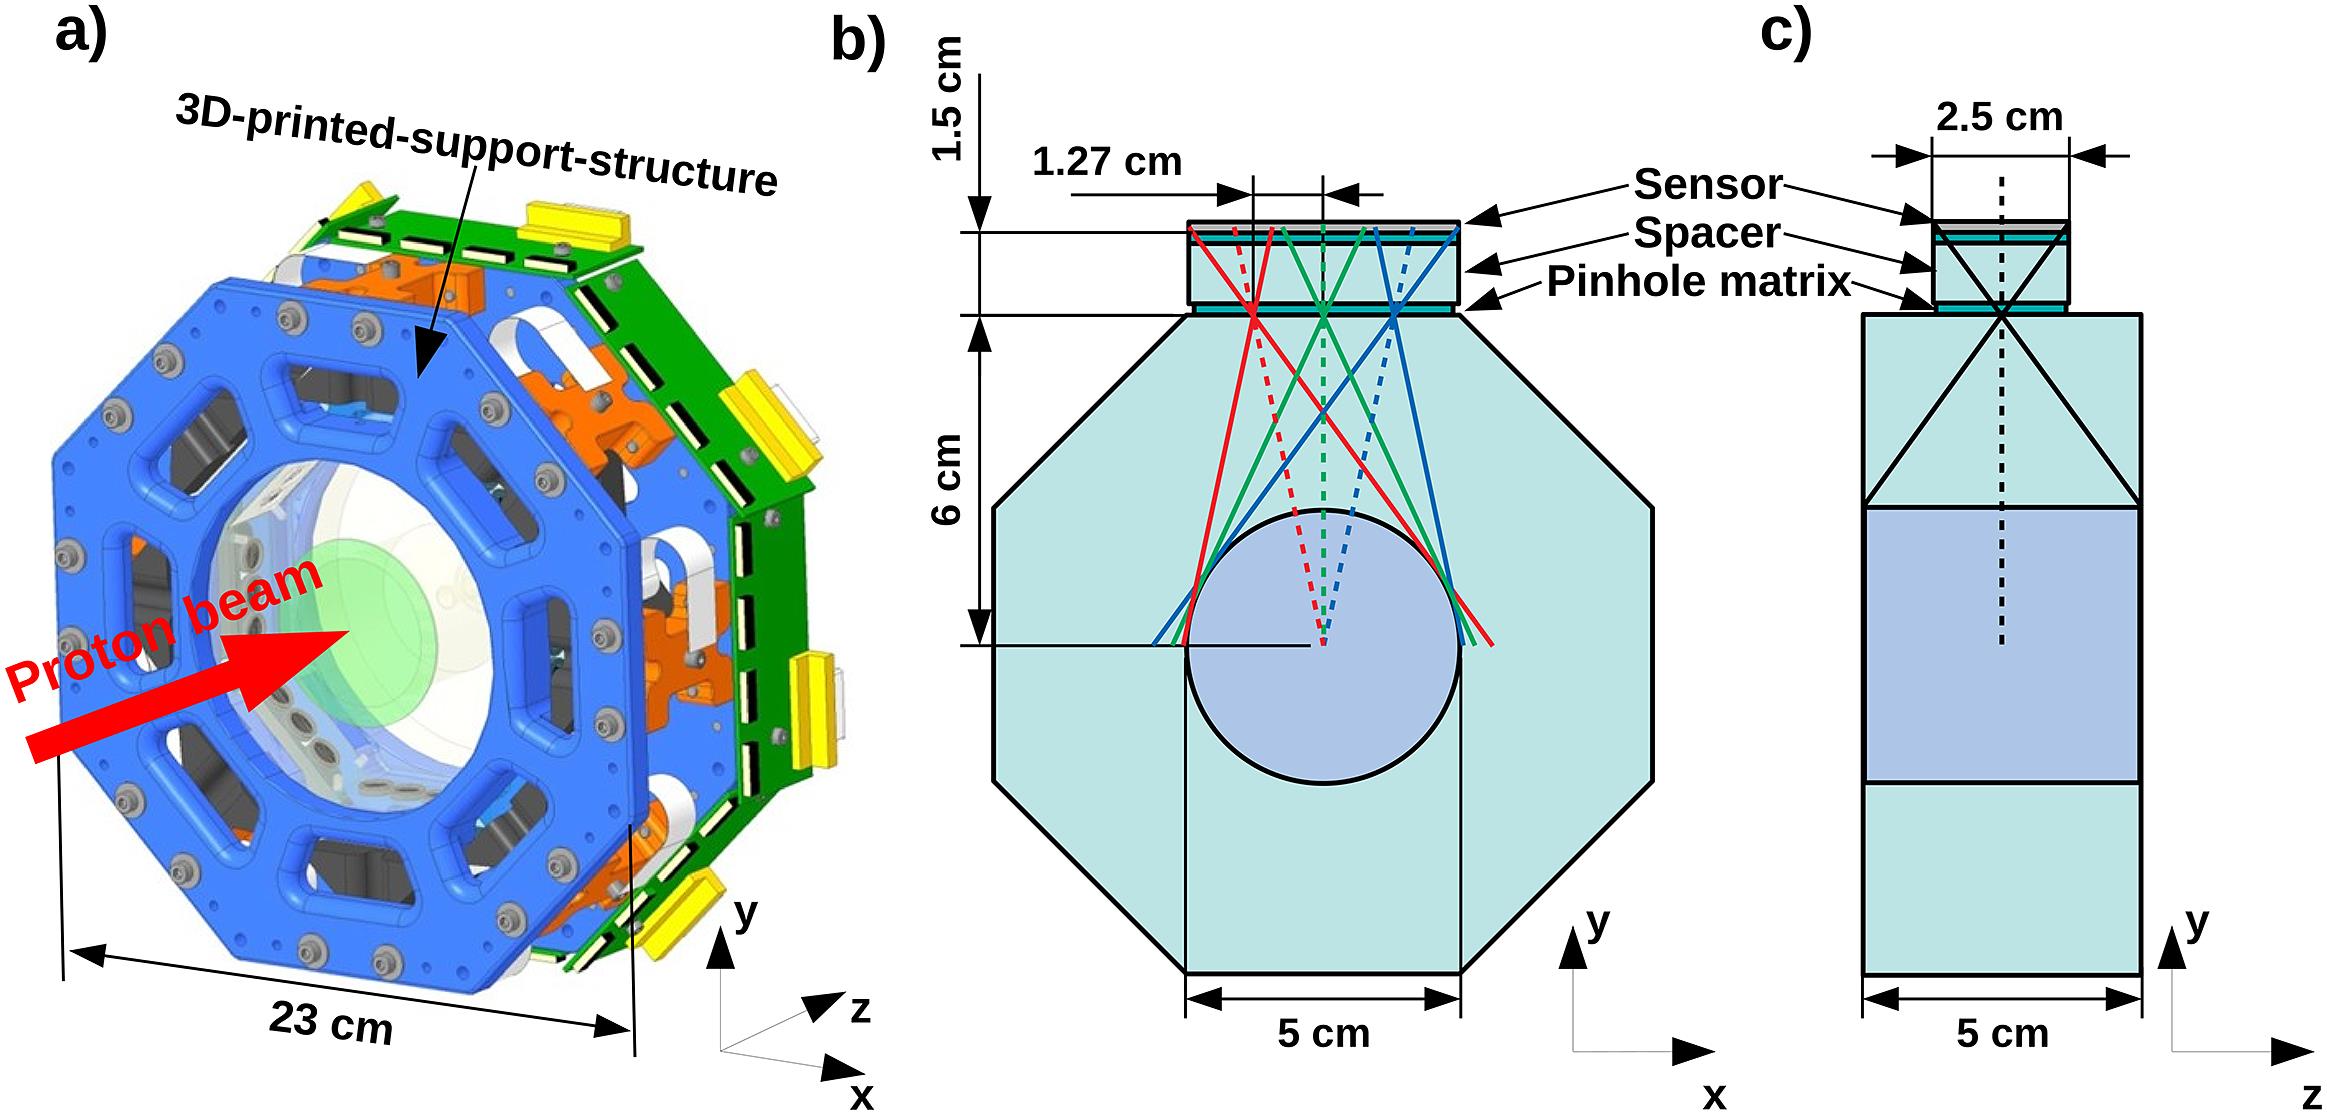 The design of the OCTOPOD (Optical Cone beam TOmograph for Proton Online Dosimetry) detector. (a) 3D view of the octagonally shaped OCTOPOD detector with an outer diameter of . (b) The schematic frontal cut-plane of the OCTOPOD with the diameter reconstruction volume filled with liquid scintillator (in blue), the octagonal polymethylmethacrylate (PMMA) housing (in green) enclosing the reconstruction volume and connecting to the three pinholes and the sensor plane at the distance of defined by a PMMA cuboid. The setup is repeated for each side of the octagonal PMMA housing to obtain 24 cone beam (CB) projections of the reconstruction volume. (c) The schematic side cut-plane with the long reconstruction volume.